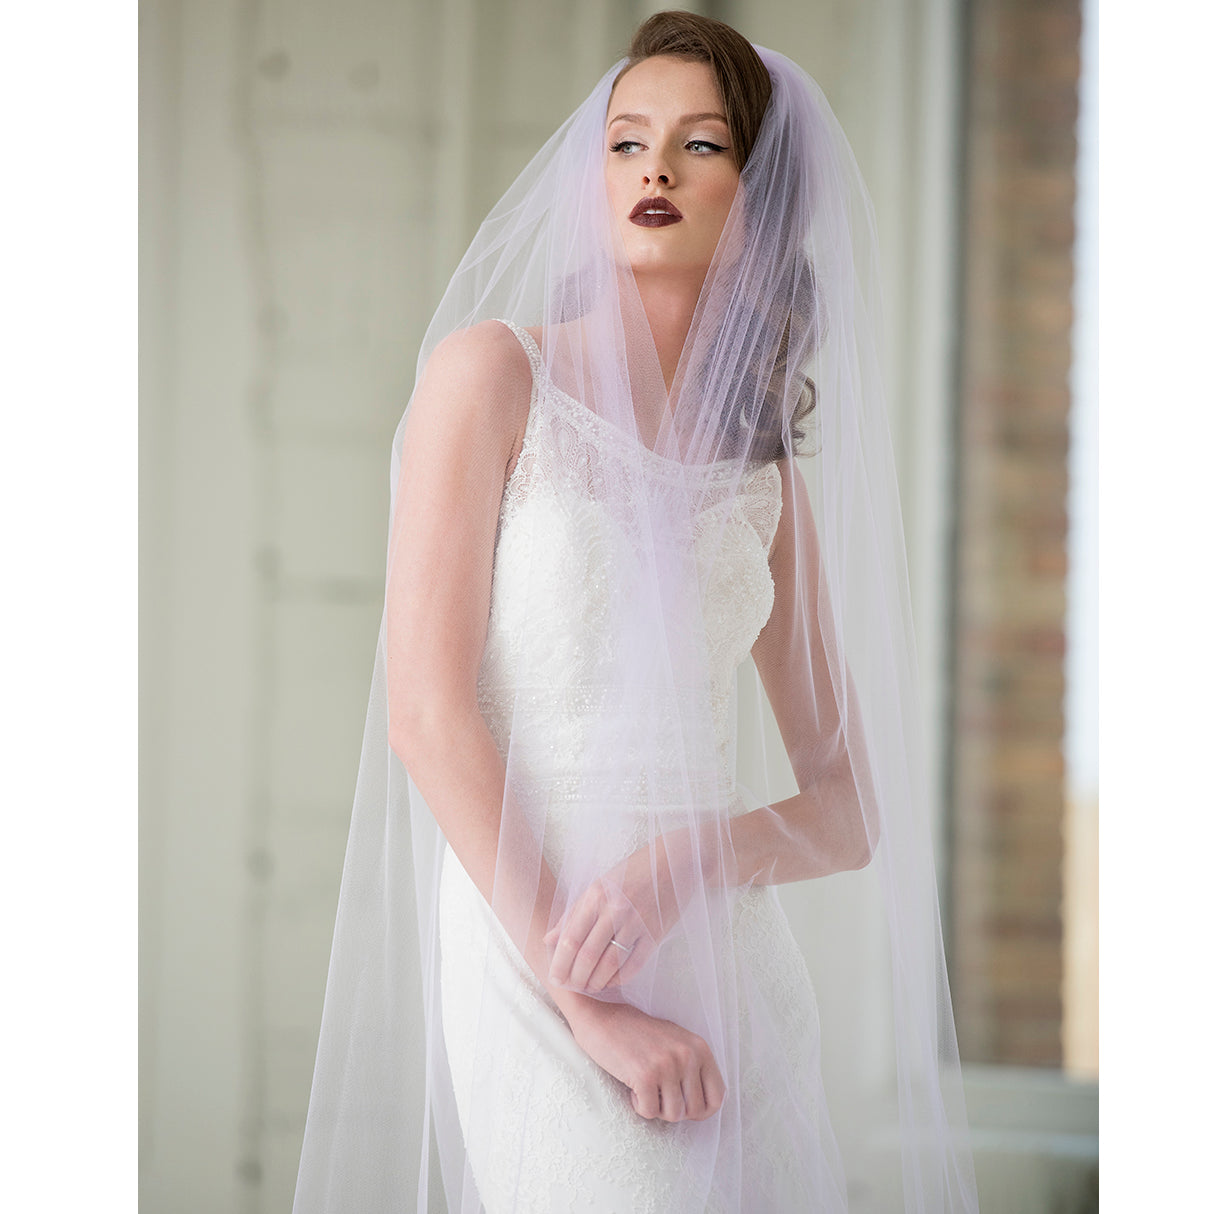 Deciding on the Perfect Veil Color for Your Wedding Day